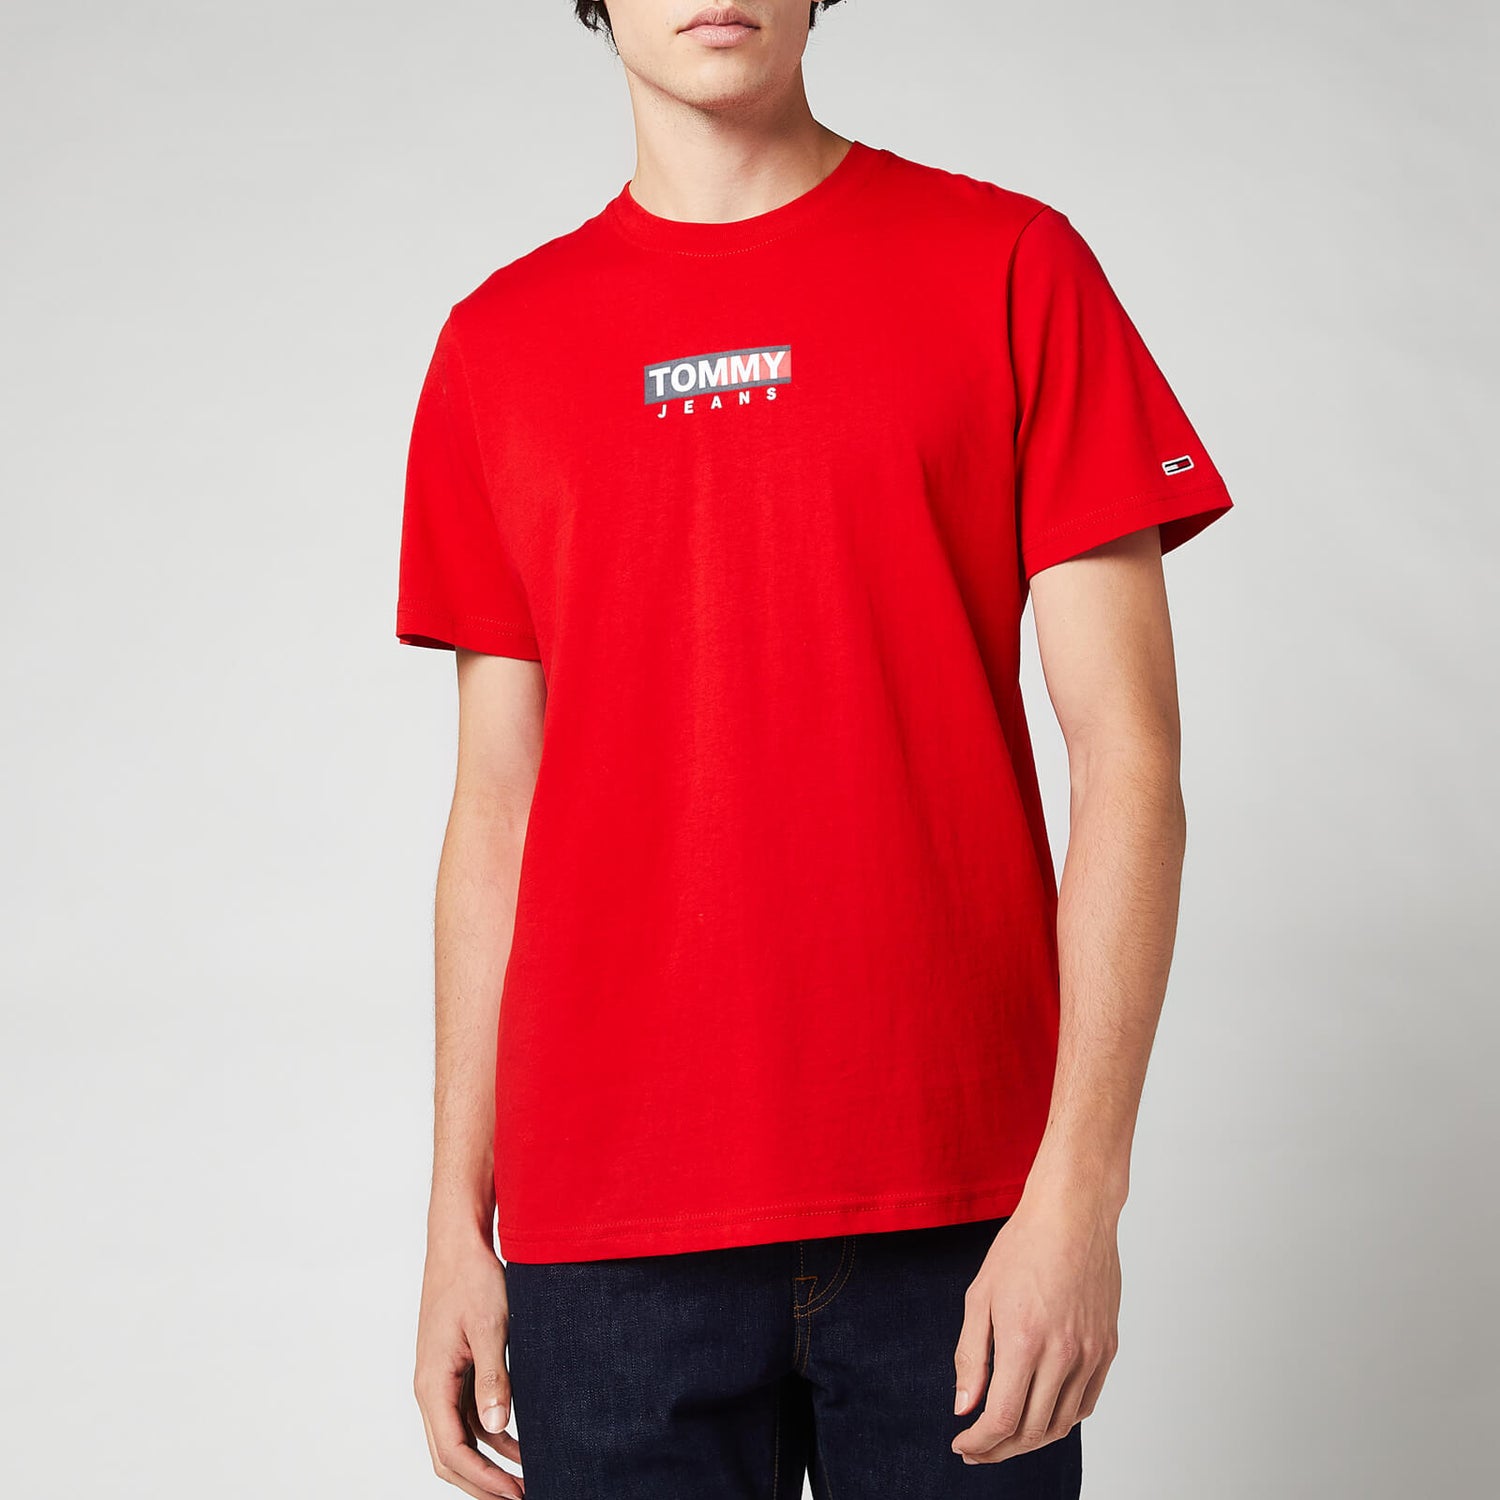 Tommy Jeans Men's Entry Print T-Shirt - Tomato Red